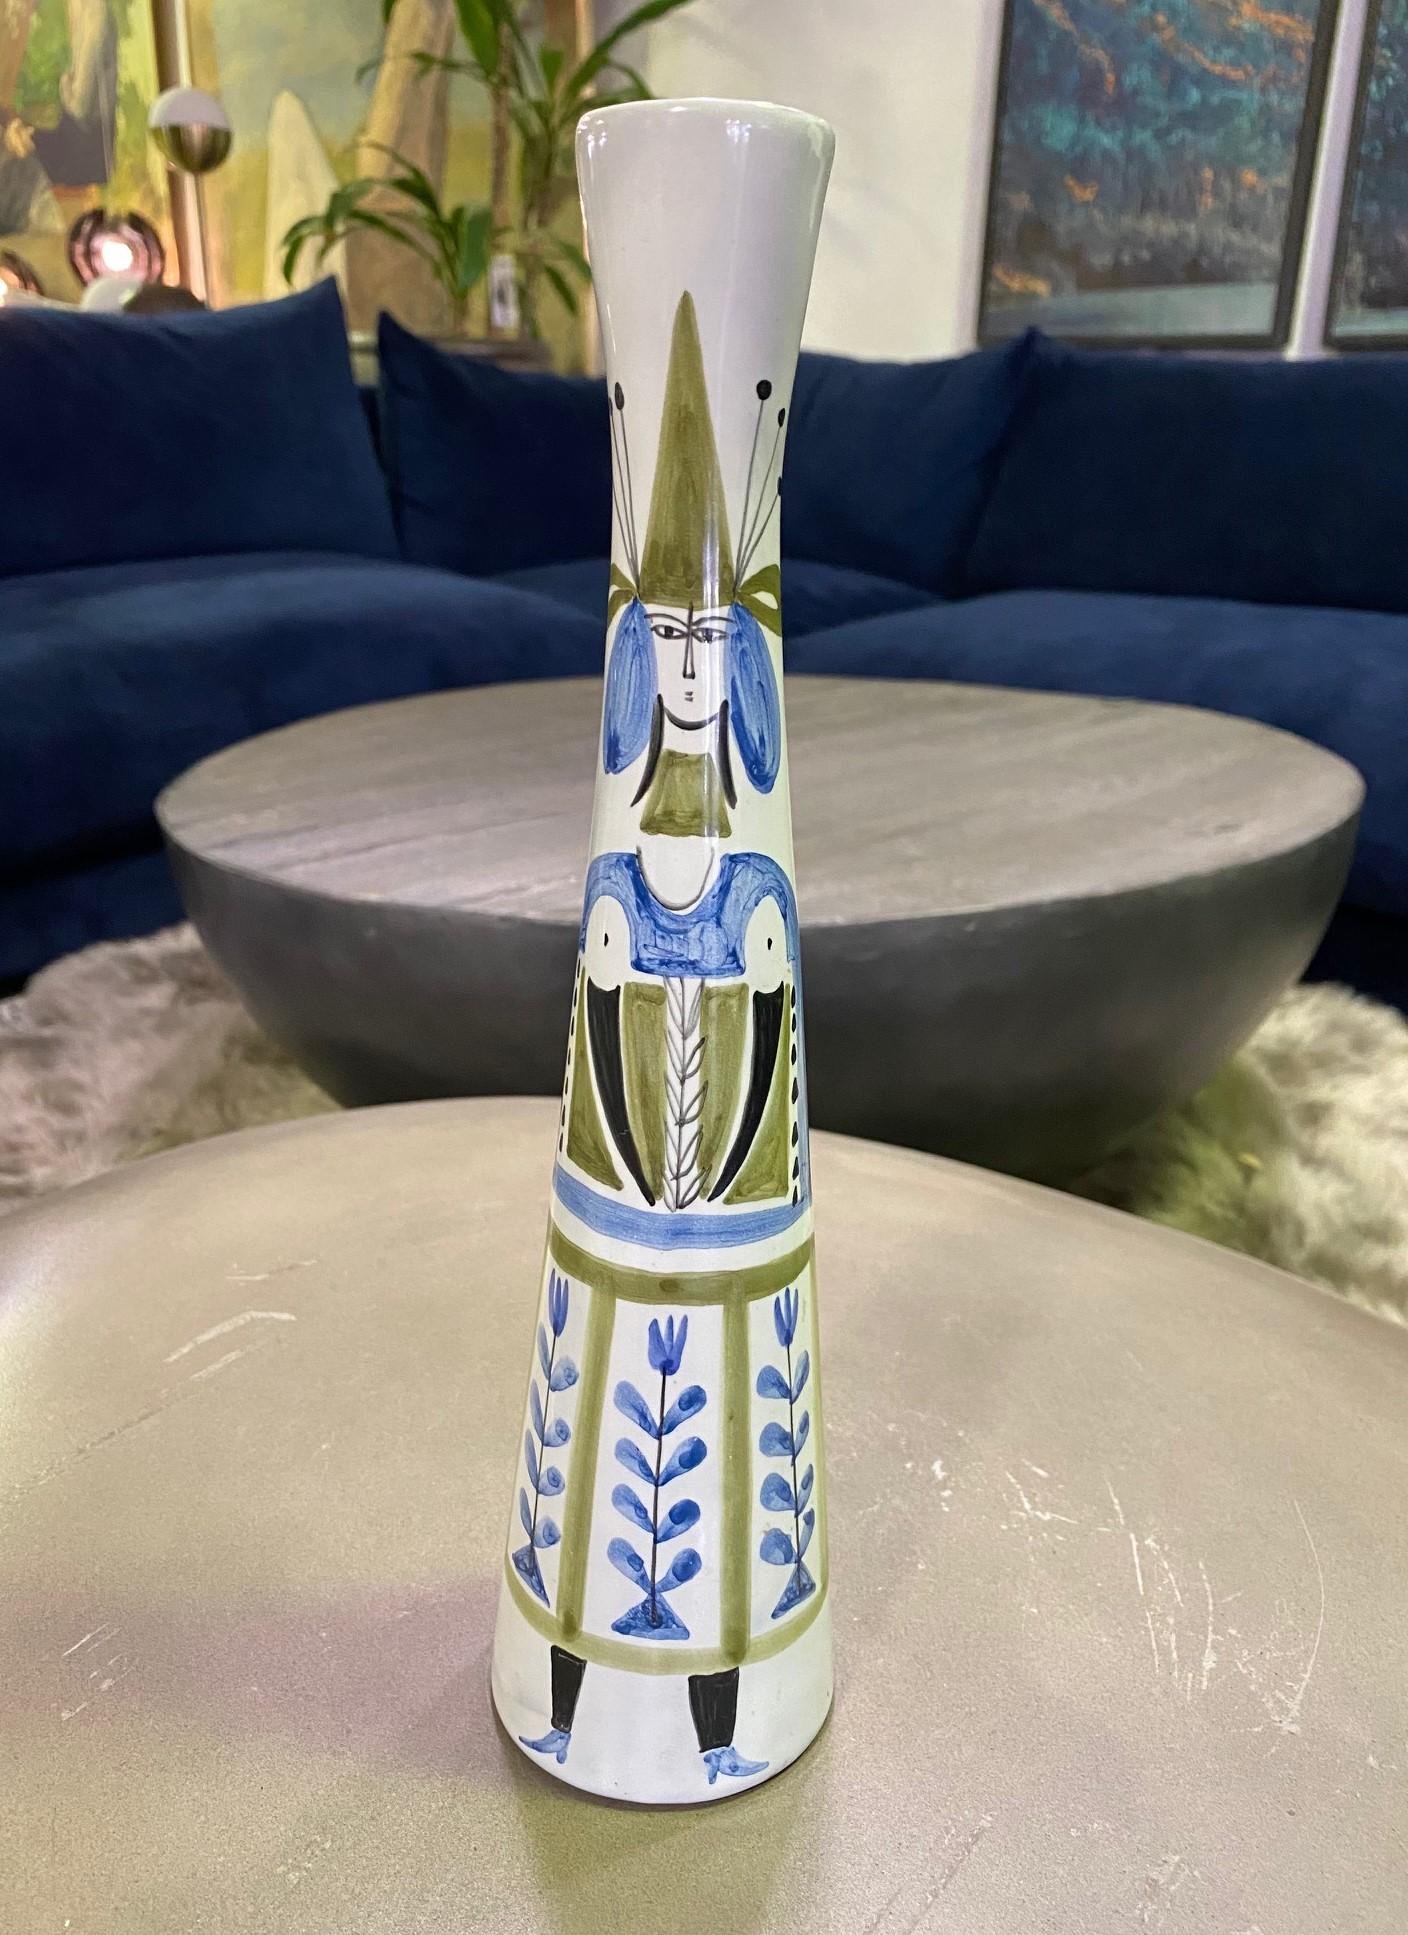 A wonderful, hand painted vase by famed French ceramist Roger Capron. Tall and slender in design. Rare and scarce as we have only seen one other example of this motif.

Would make for a fantastic addition to any French or Mid-Century Modern